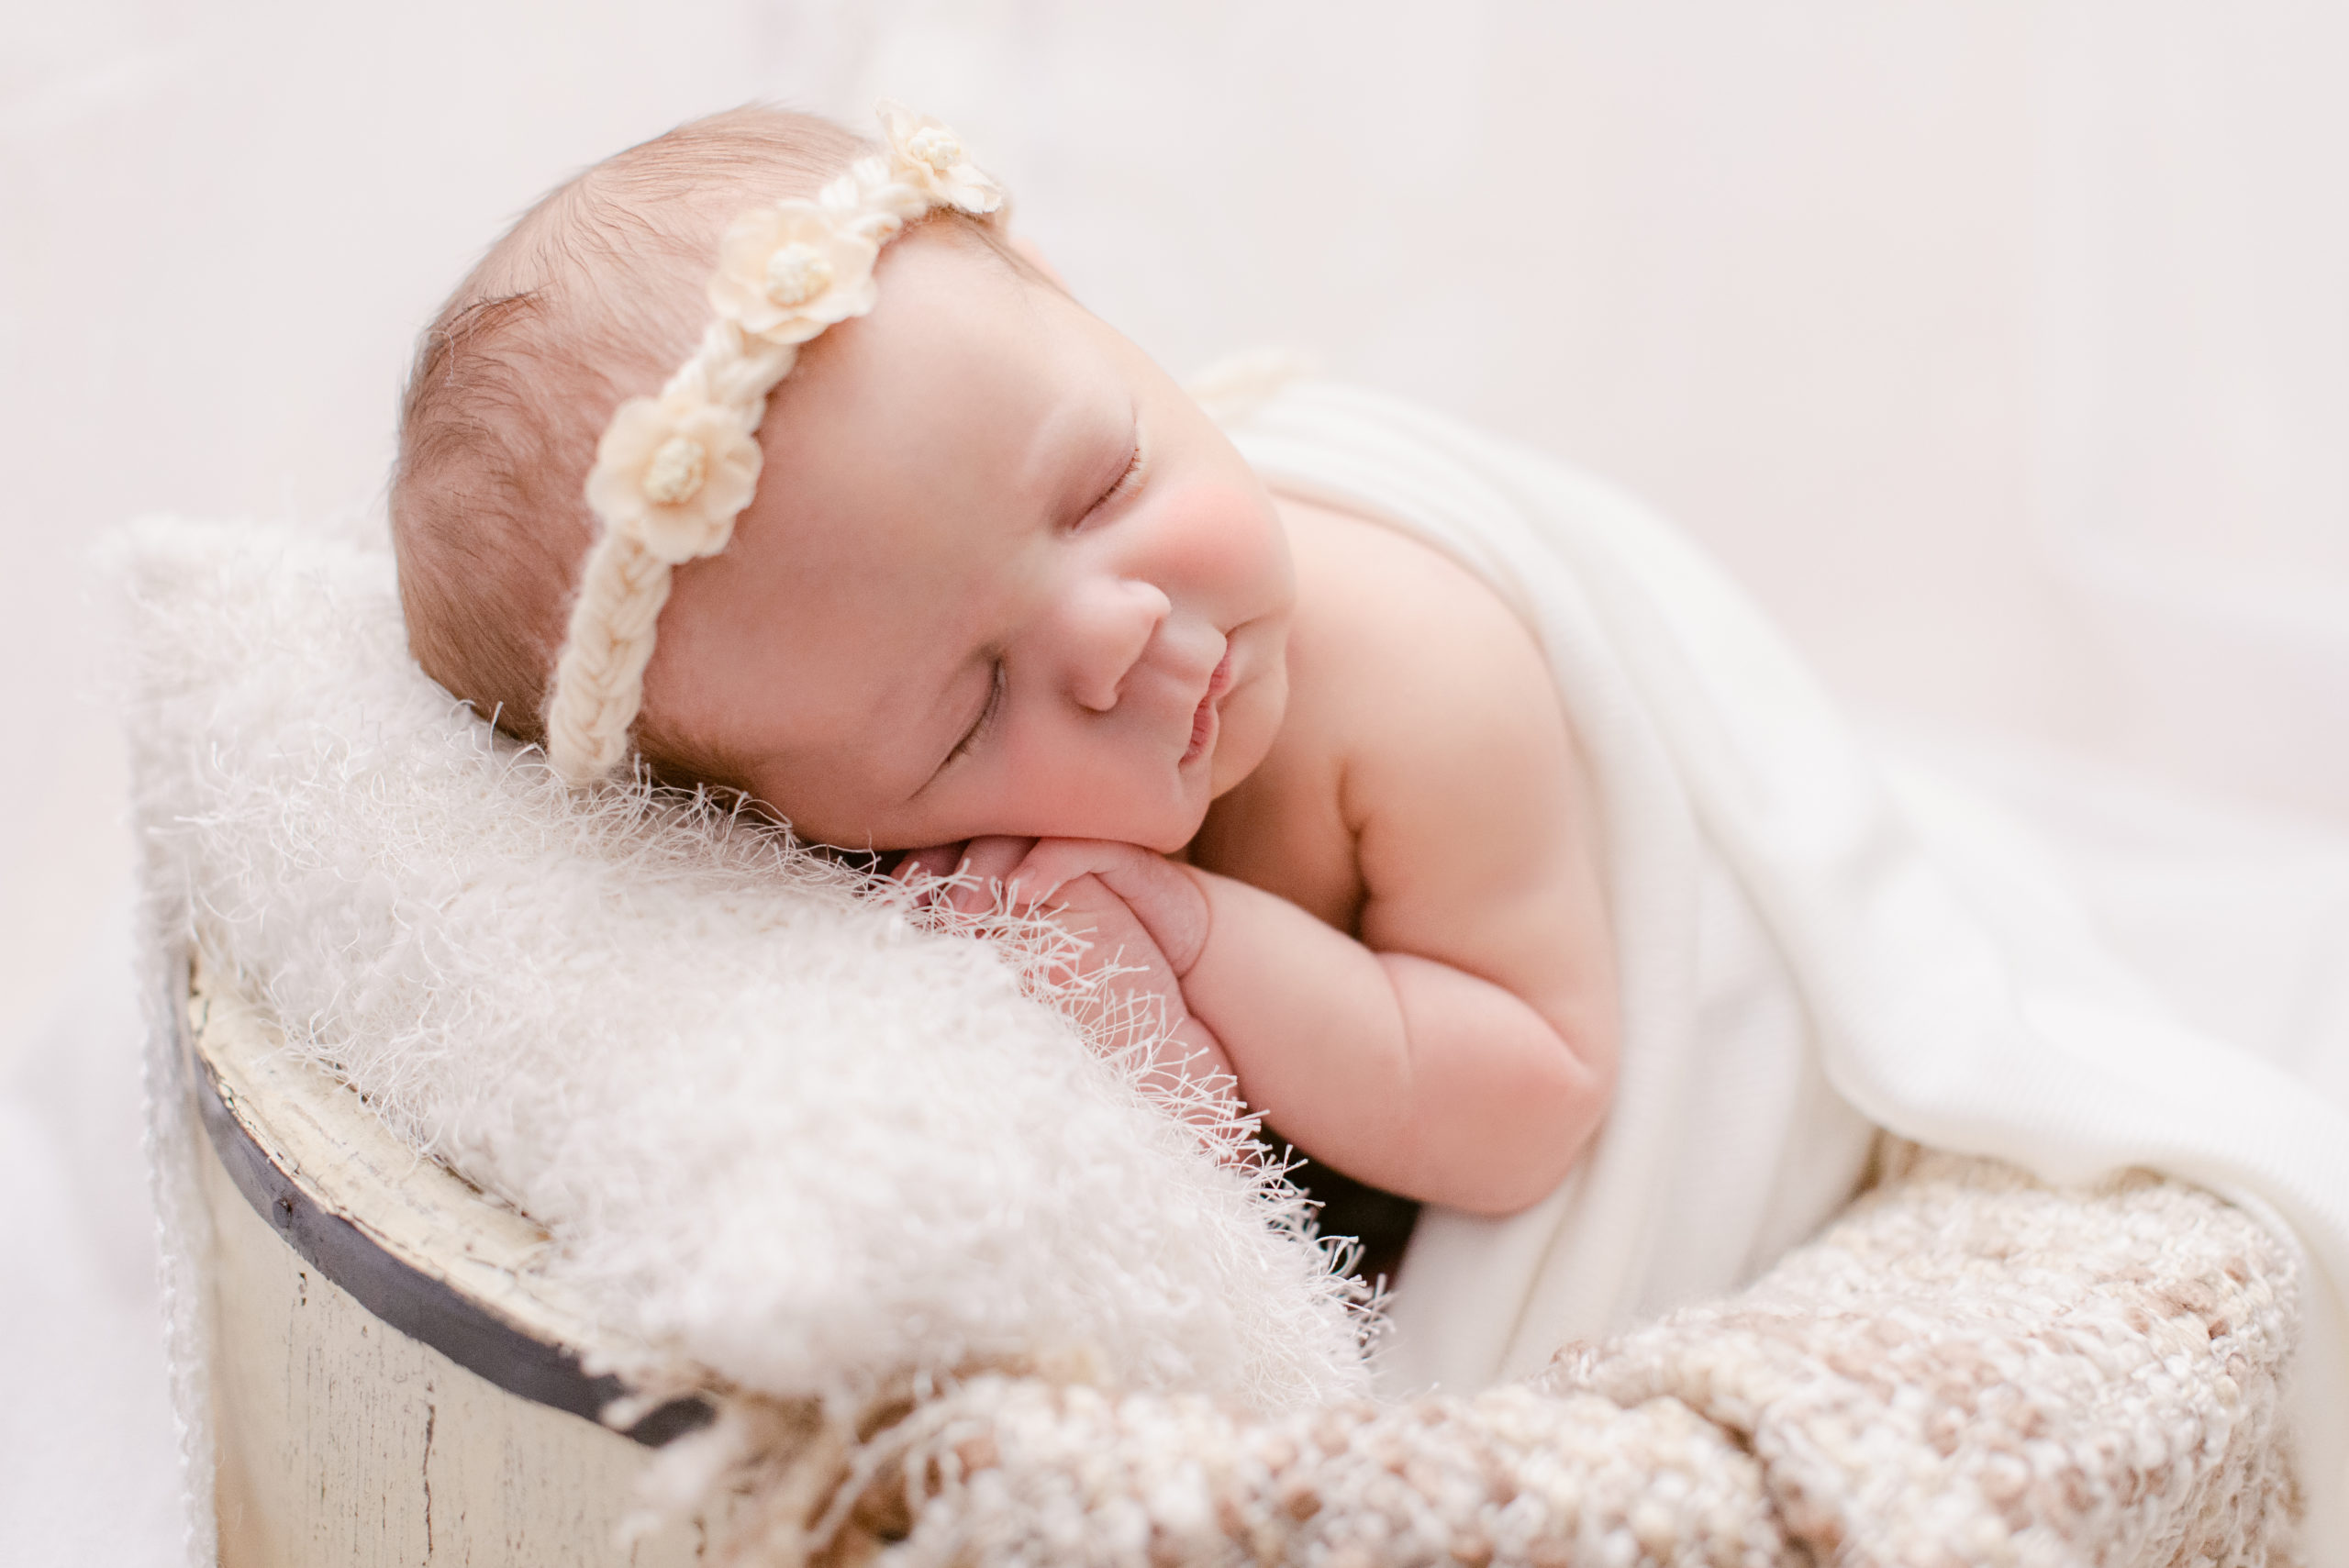 How should I prepare for my newborn session?